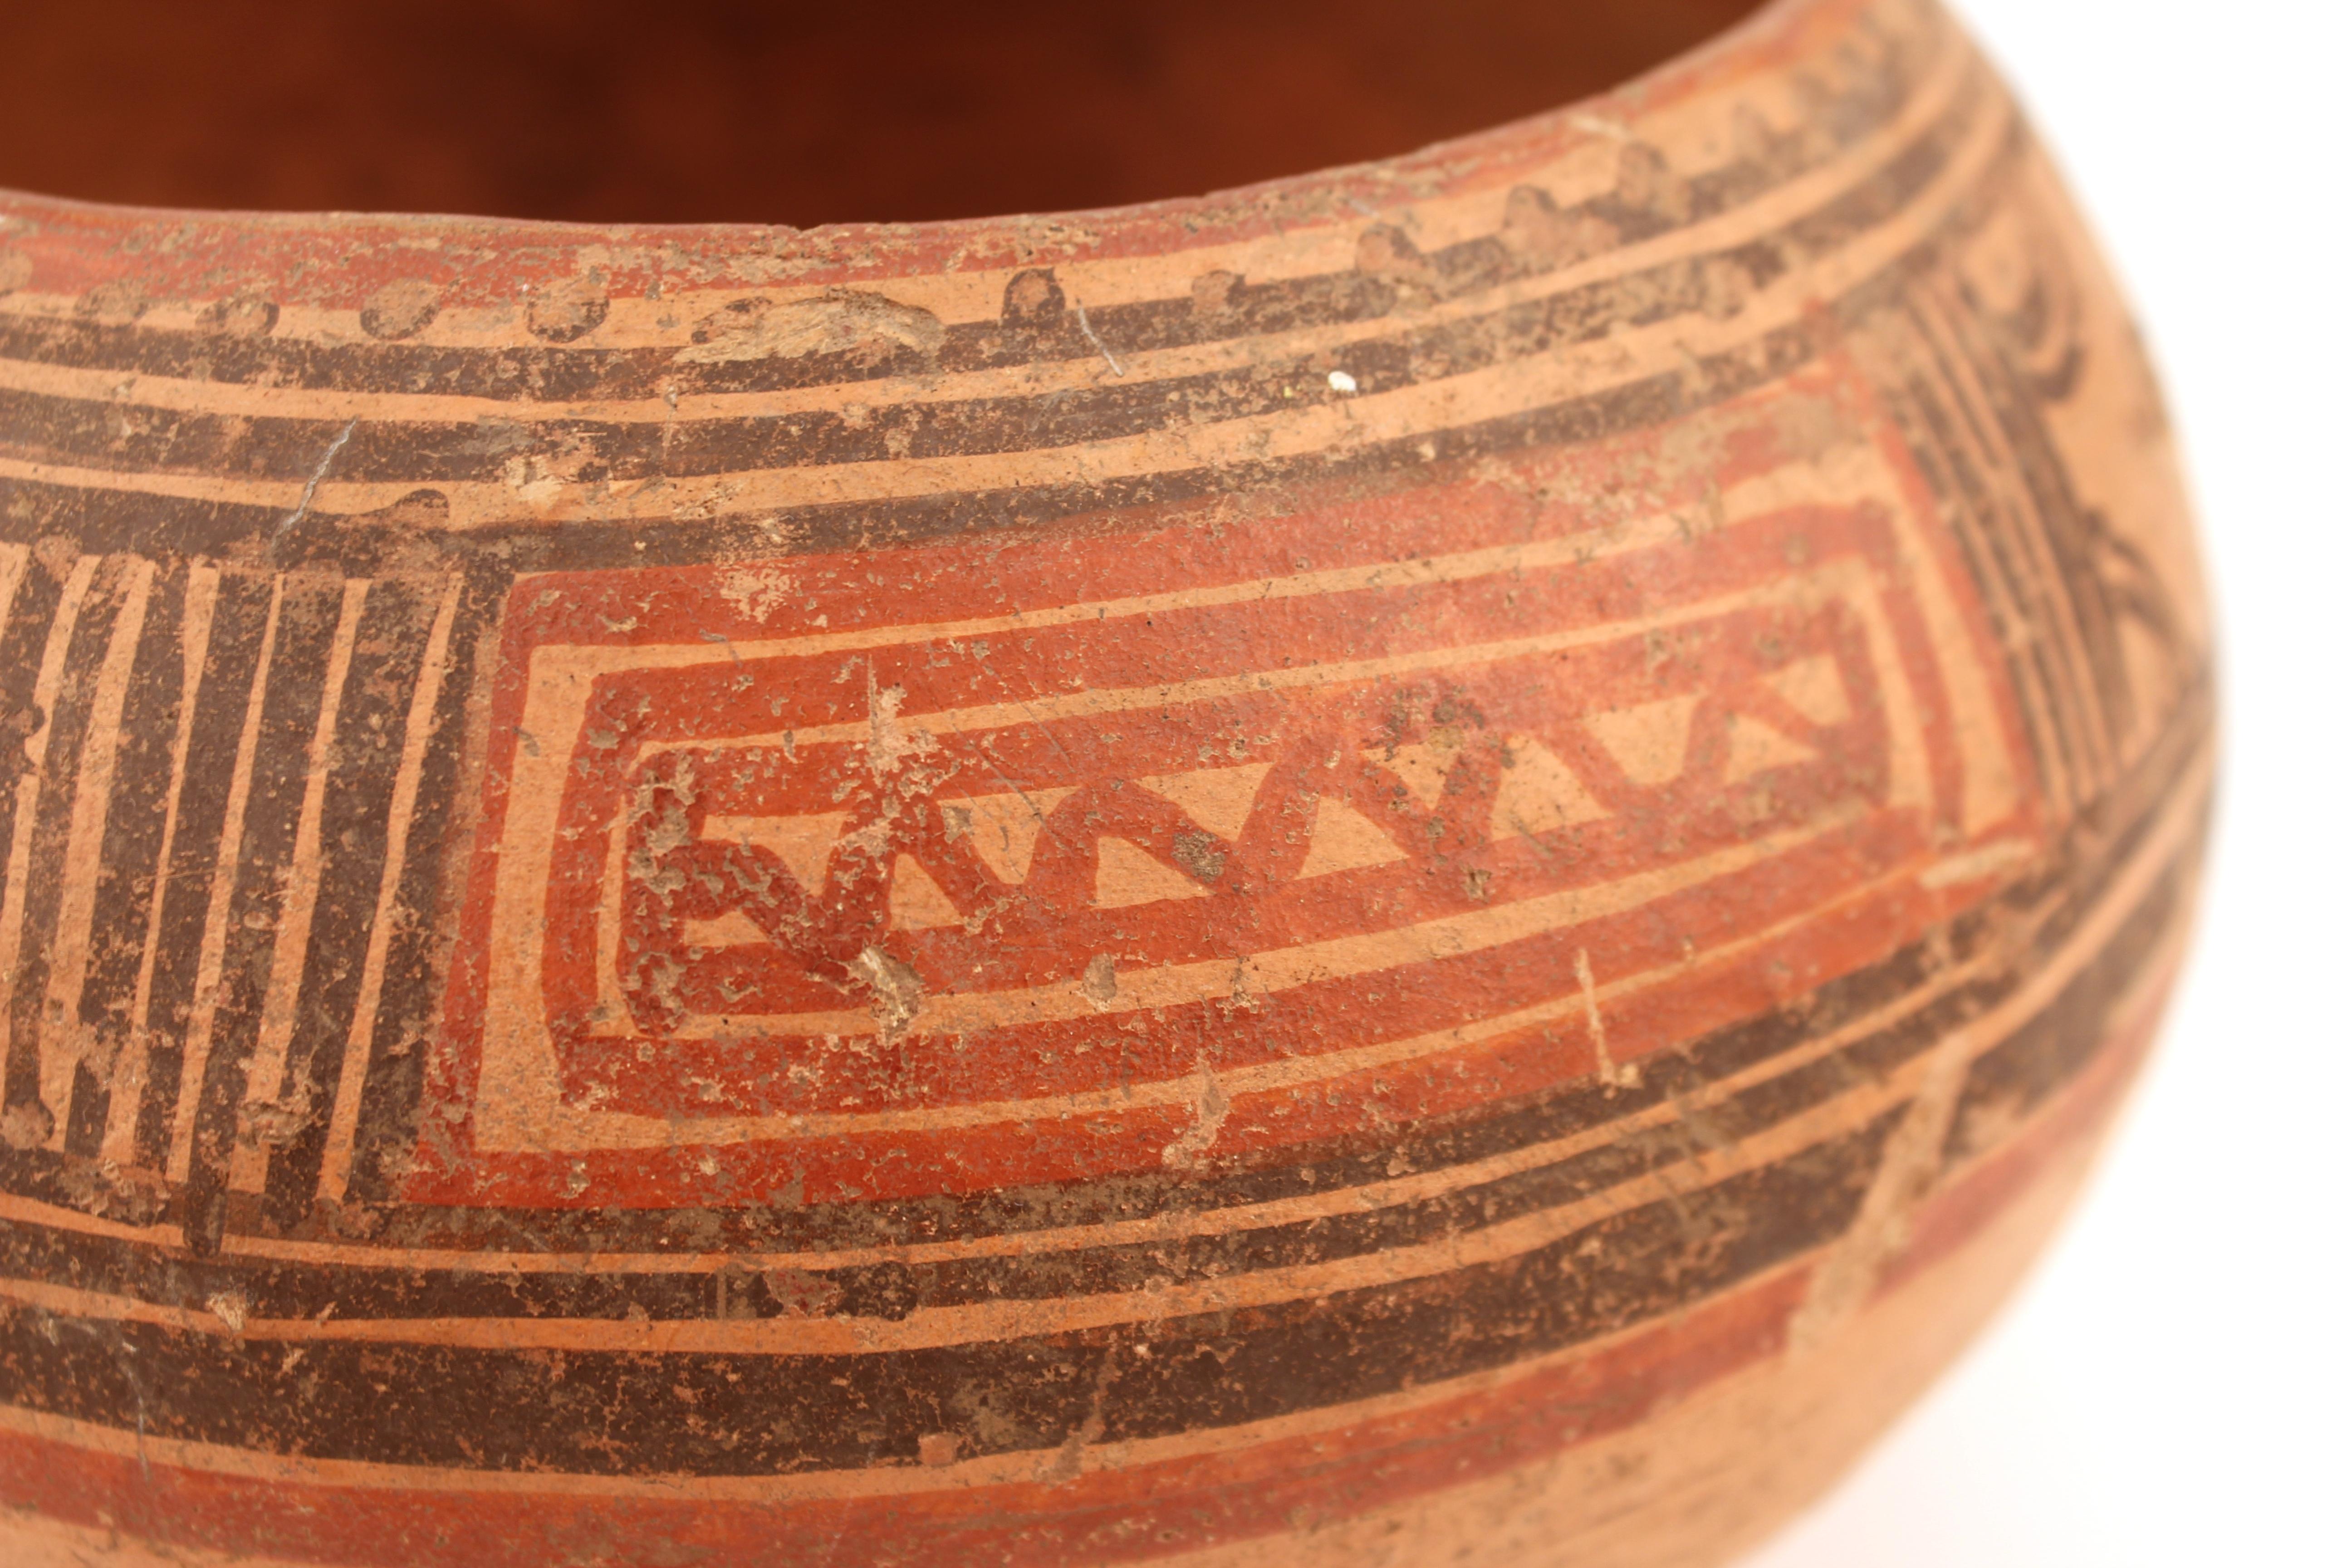 Clay Pre-Columbian Nicoya Pottery Bowl from Costa Rica